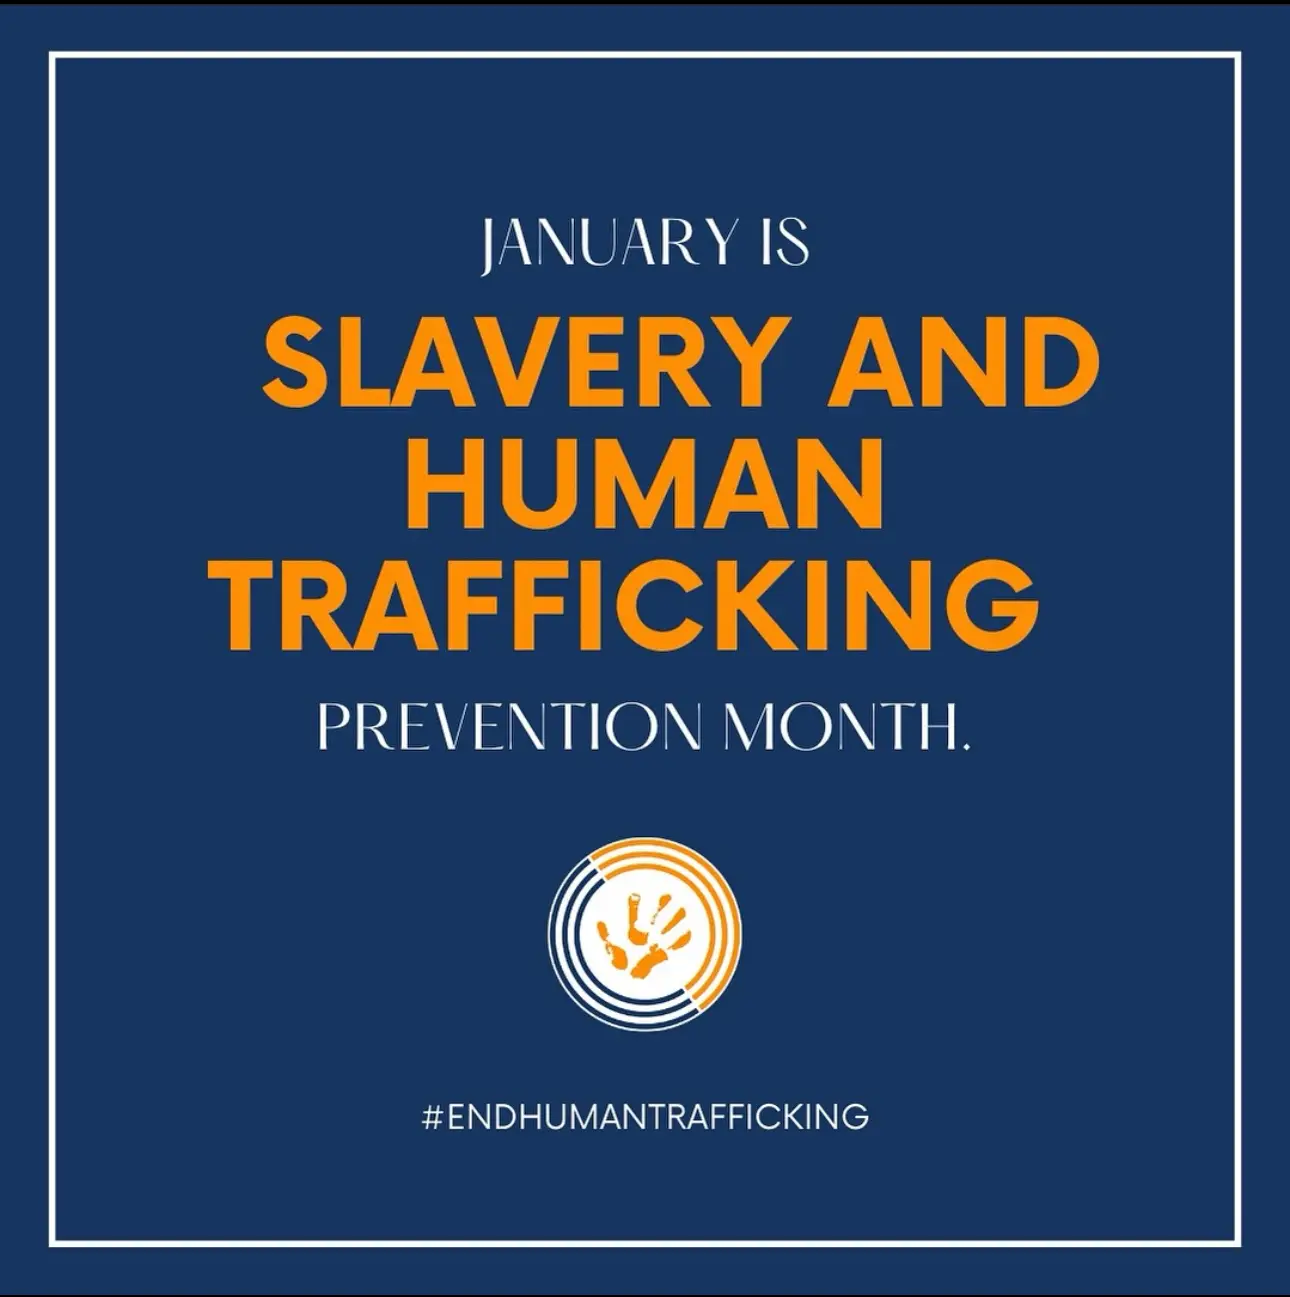 January is Slavery and Human Trafficking Prevention Month